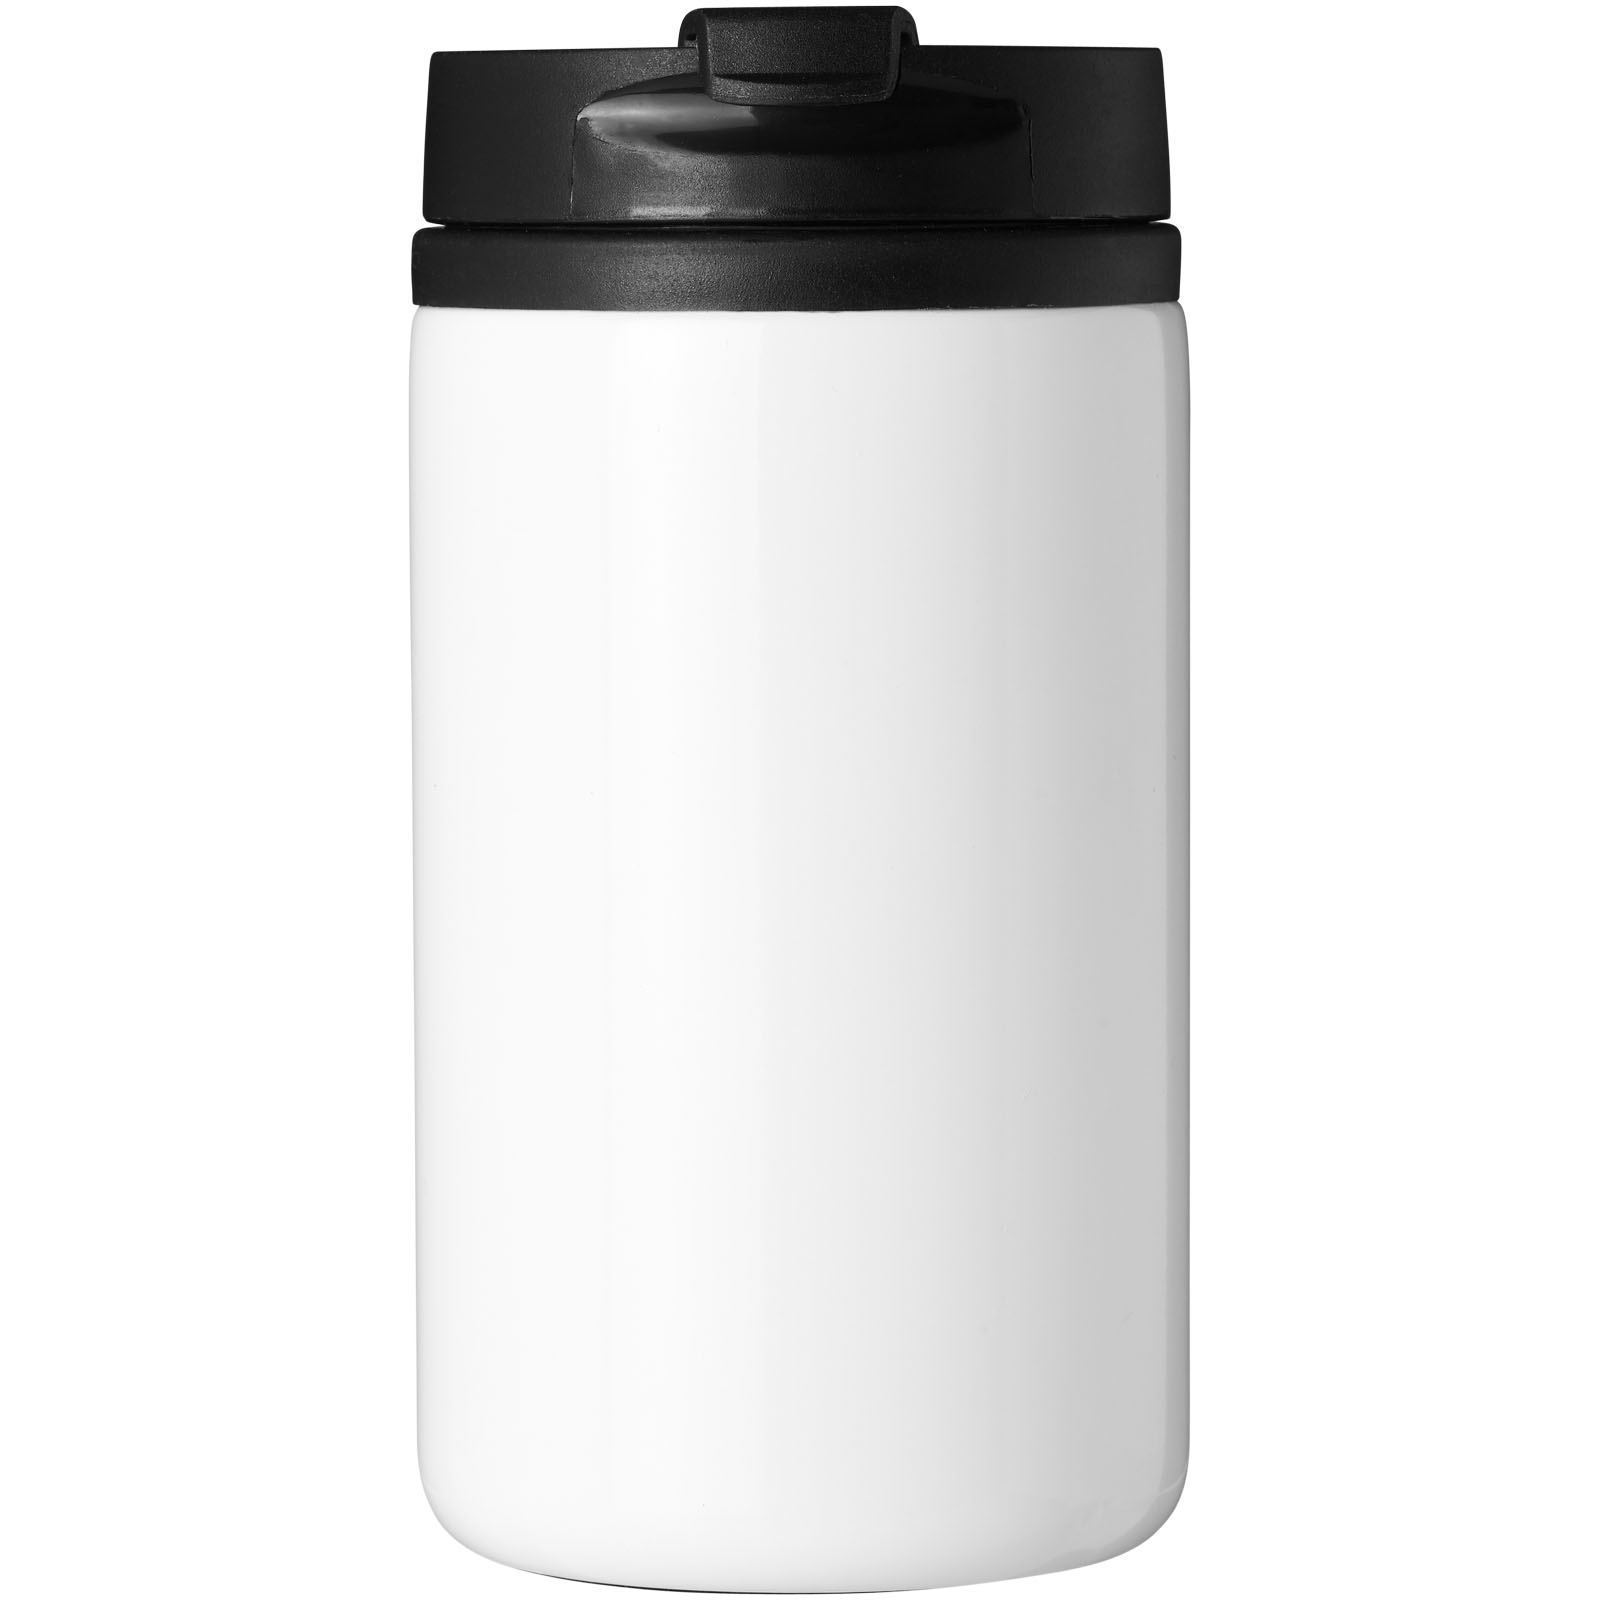 Advertising Travel mugs - Mojave 250 ml RCS certified recycled stainless steel insulated tumbler - 1